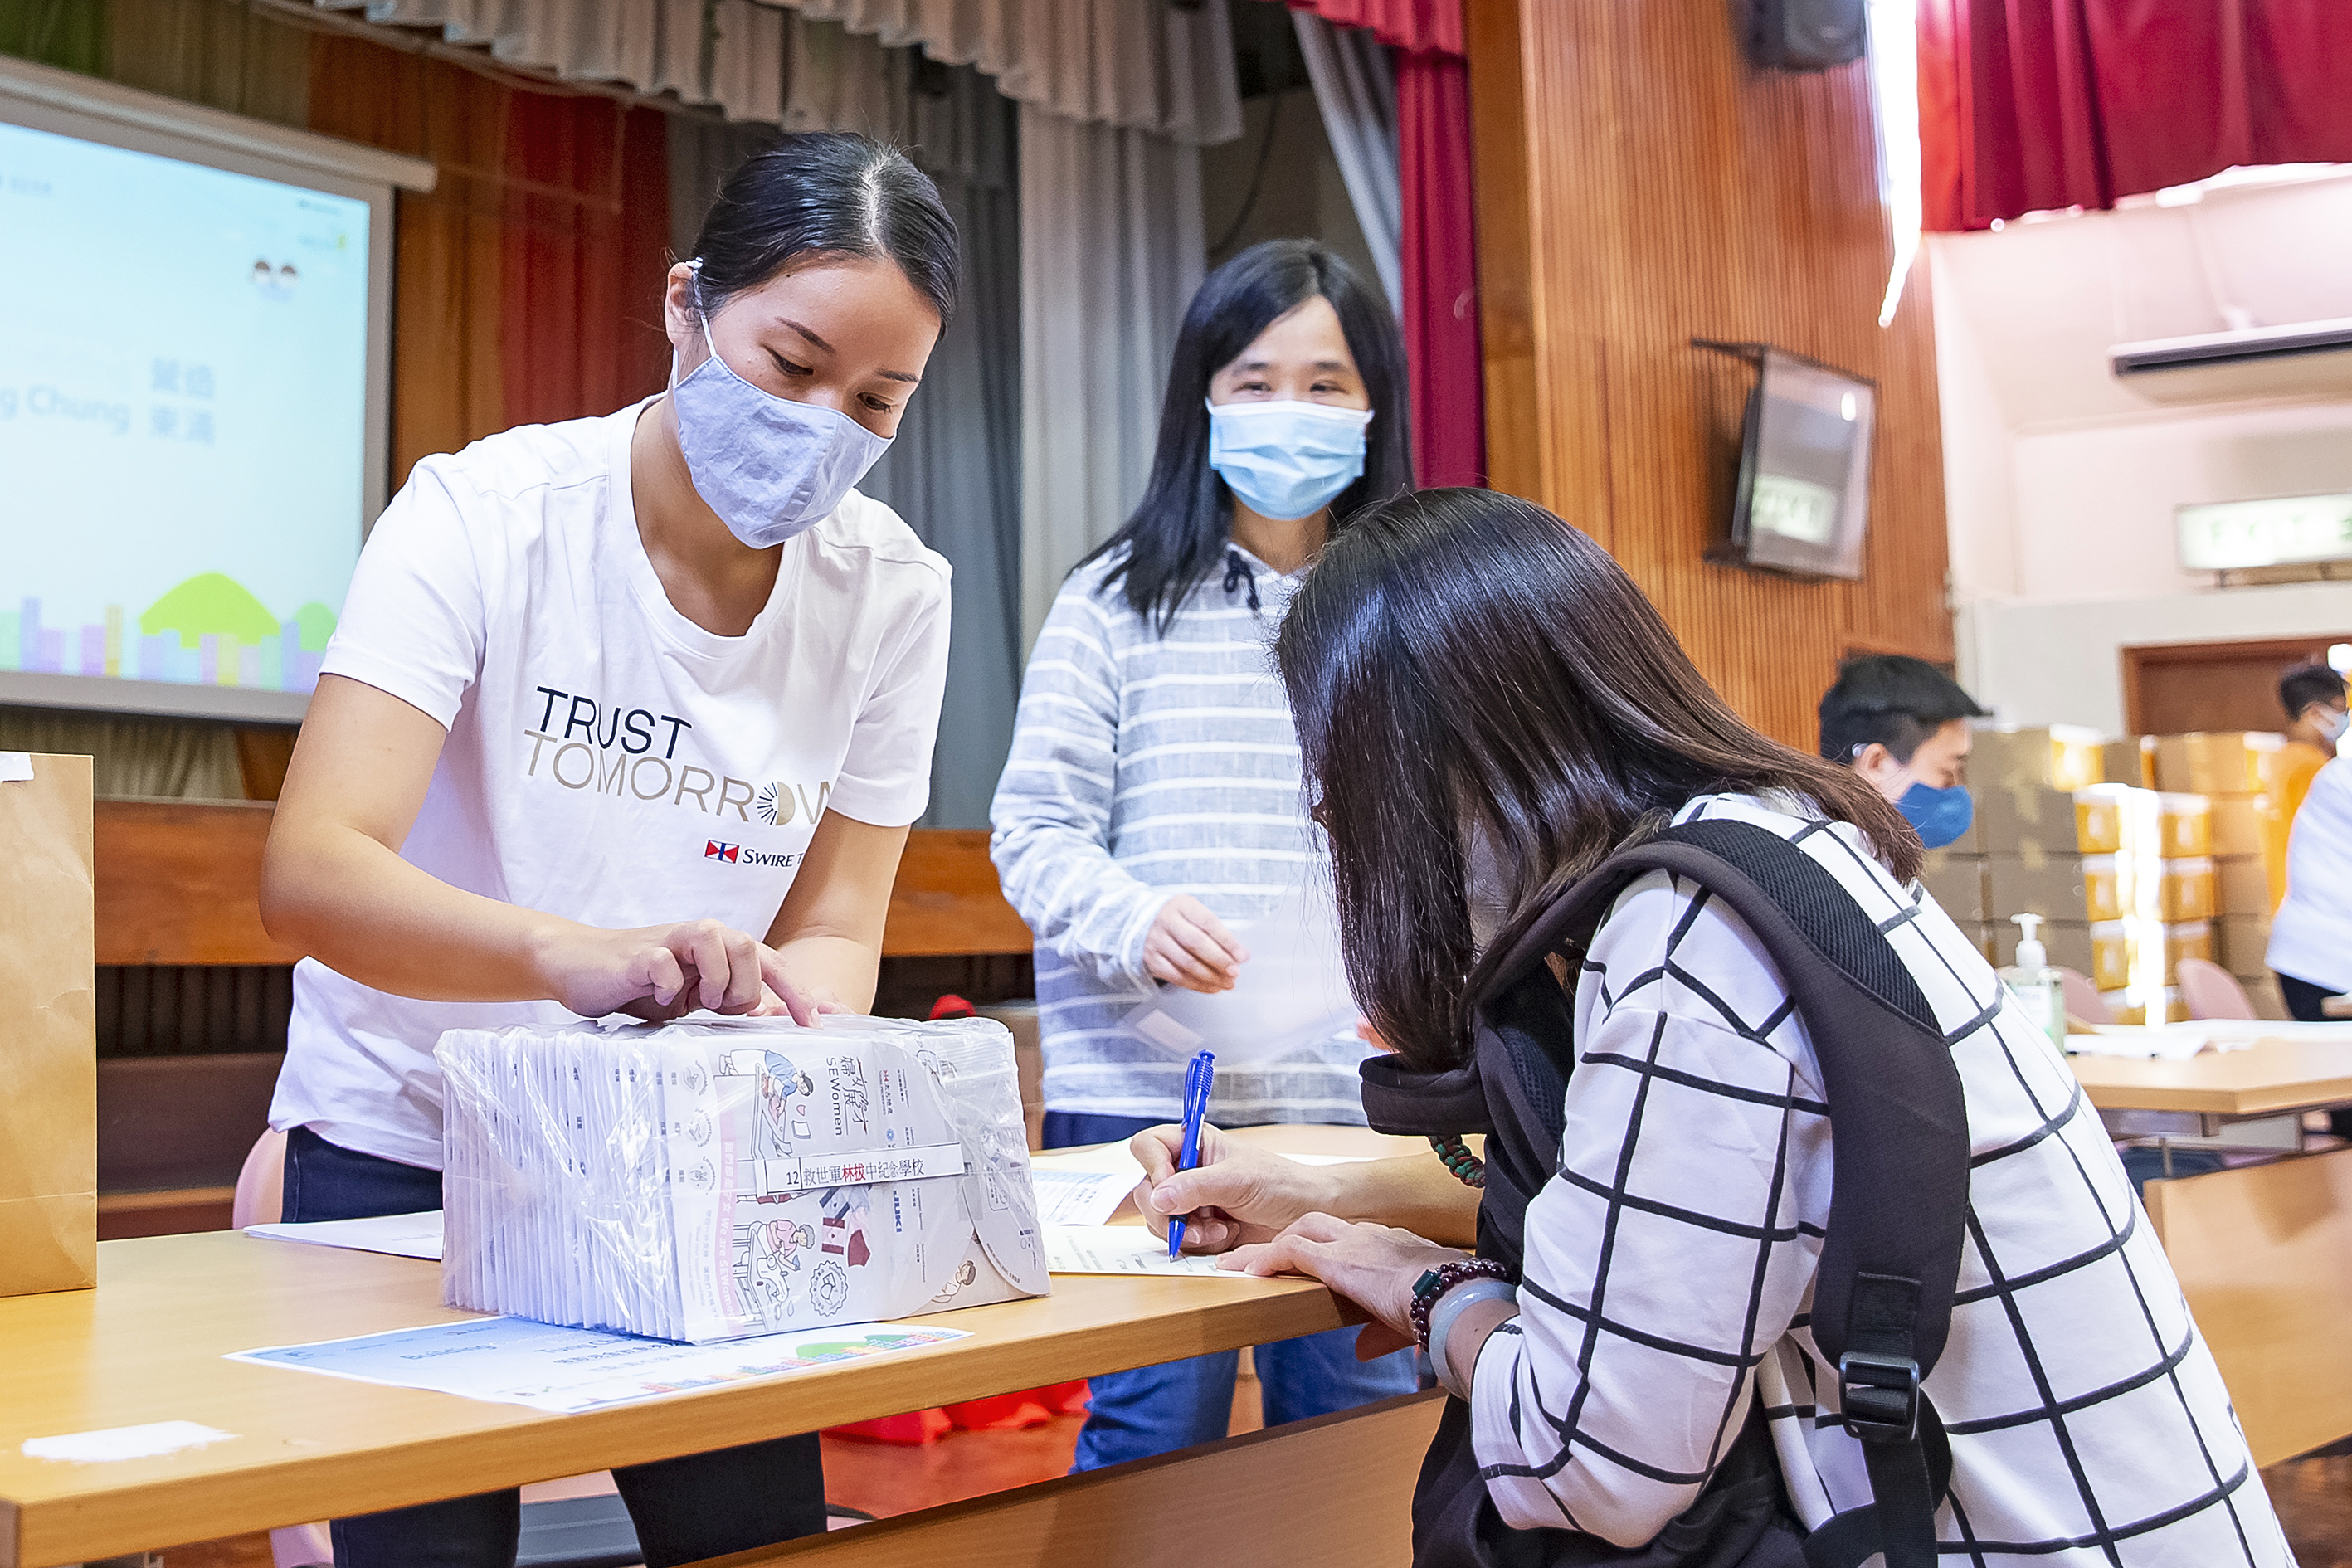 A TrustTomorrow volunteer (left) distributes care packs at a community event.